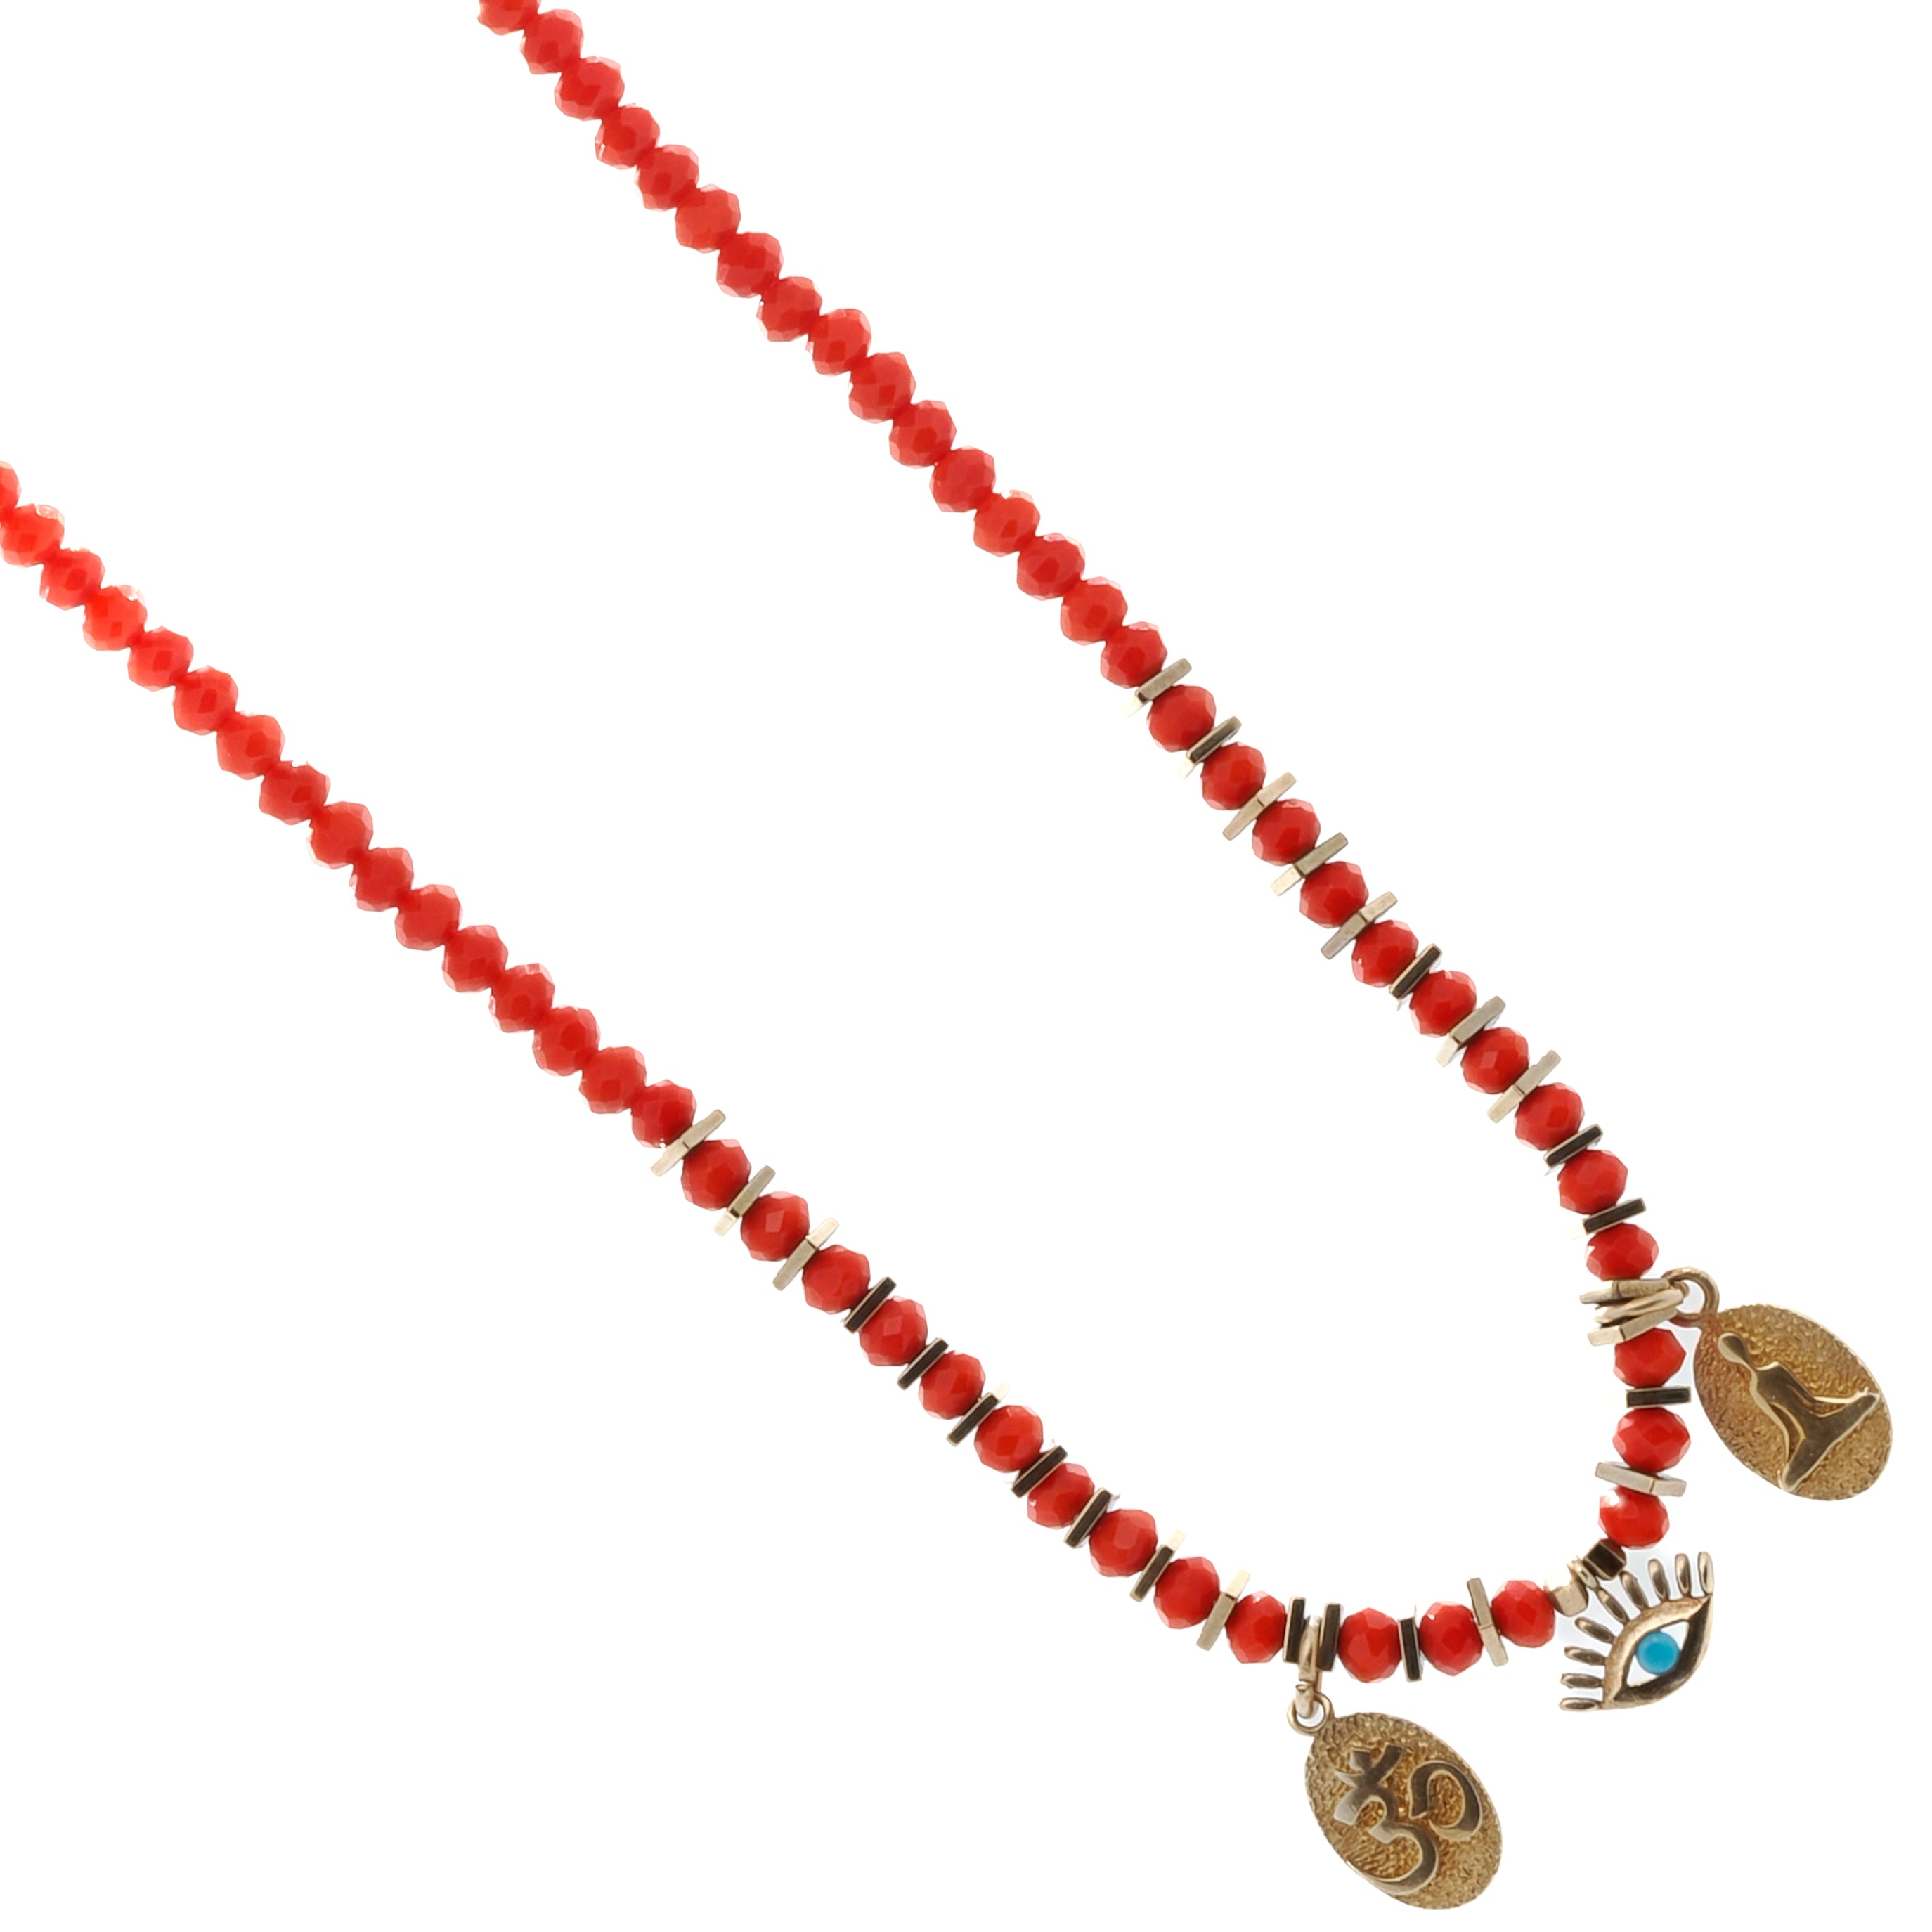 Invite good energy into your life with the Yoga Girl Choker Necklace&#39;s meaningful symbols.